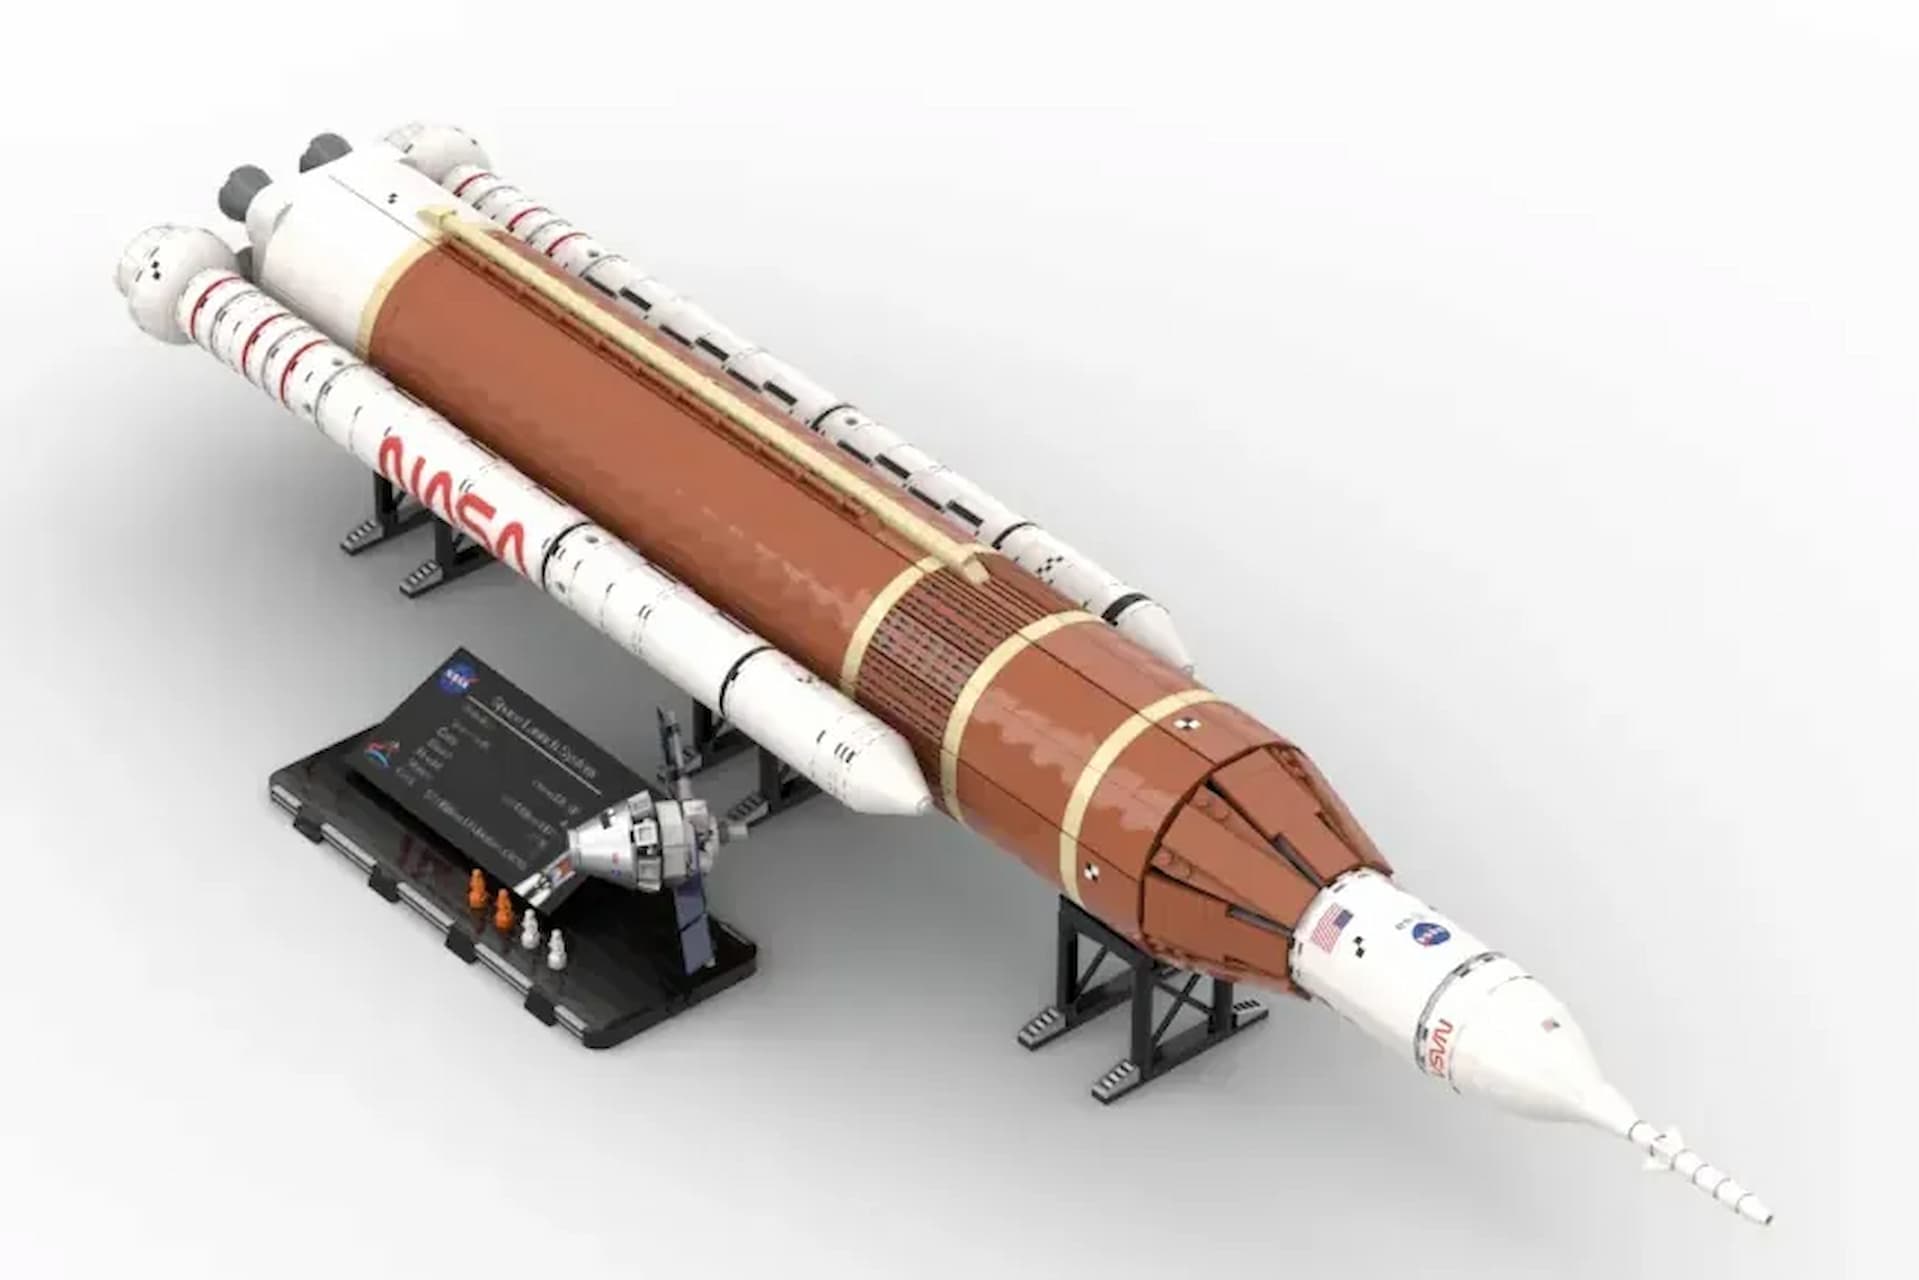 Concept images of the Lego Ideas submission, NASA SLS To the Moon and Mars